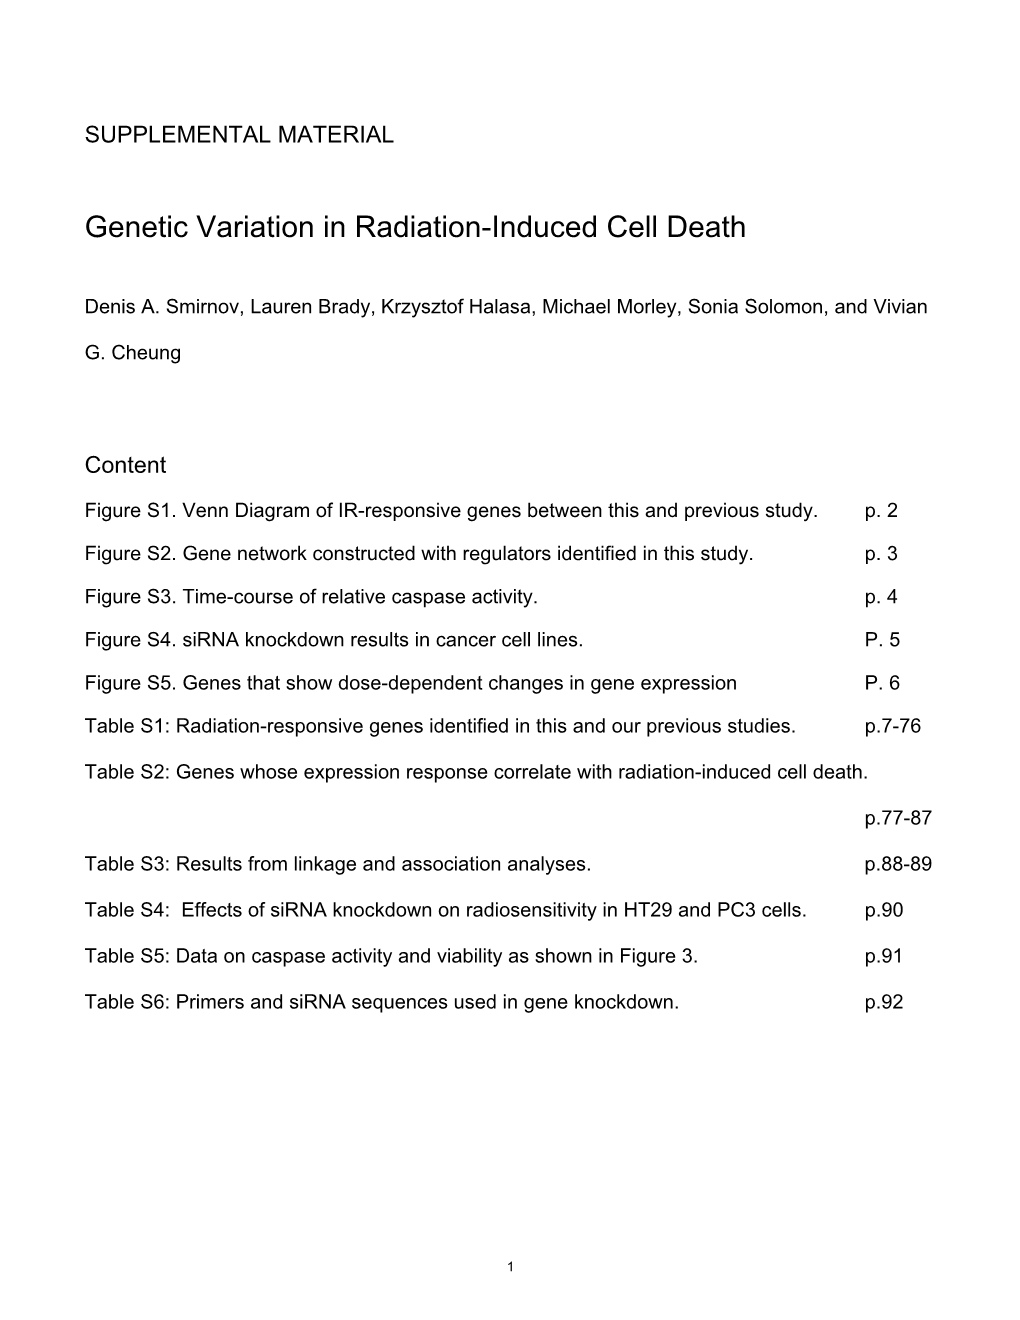 Genetic Variation in Radiation-Induced Cell Death